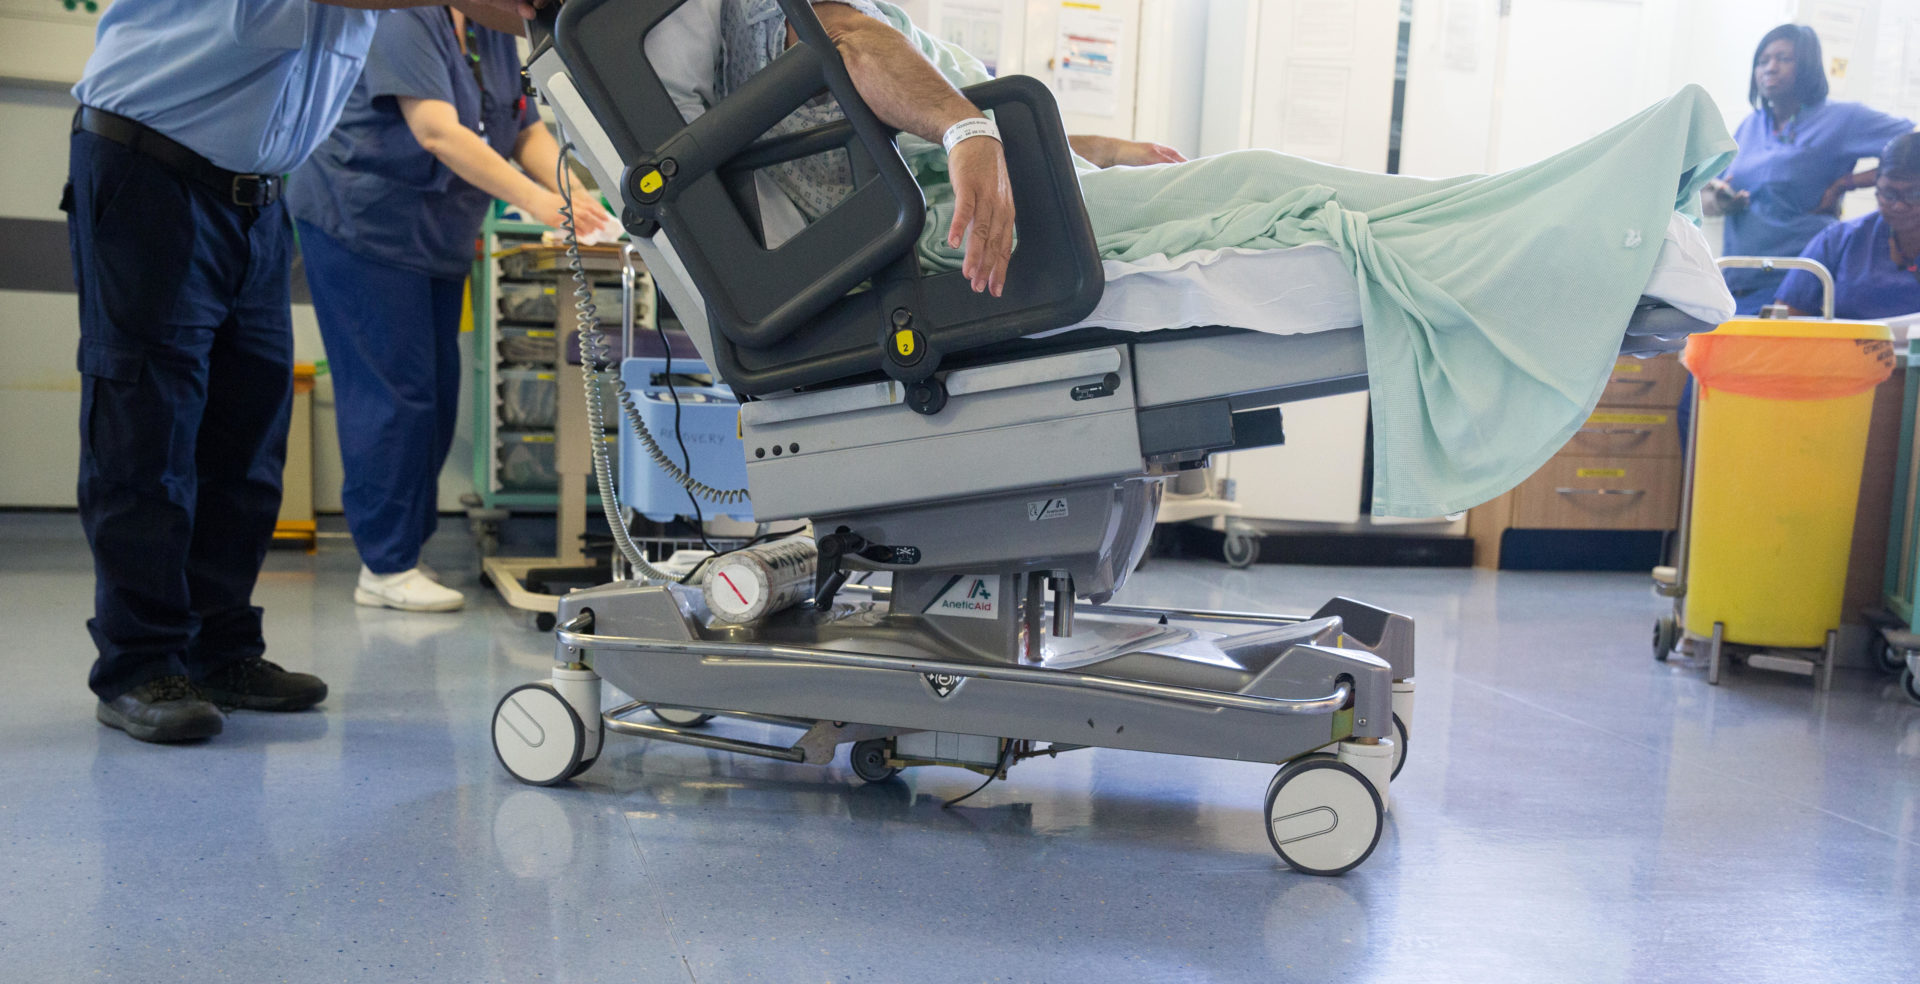 A hospital worker wheels a patient on a trolley through a ward after an NHS operation